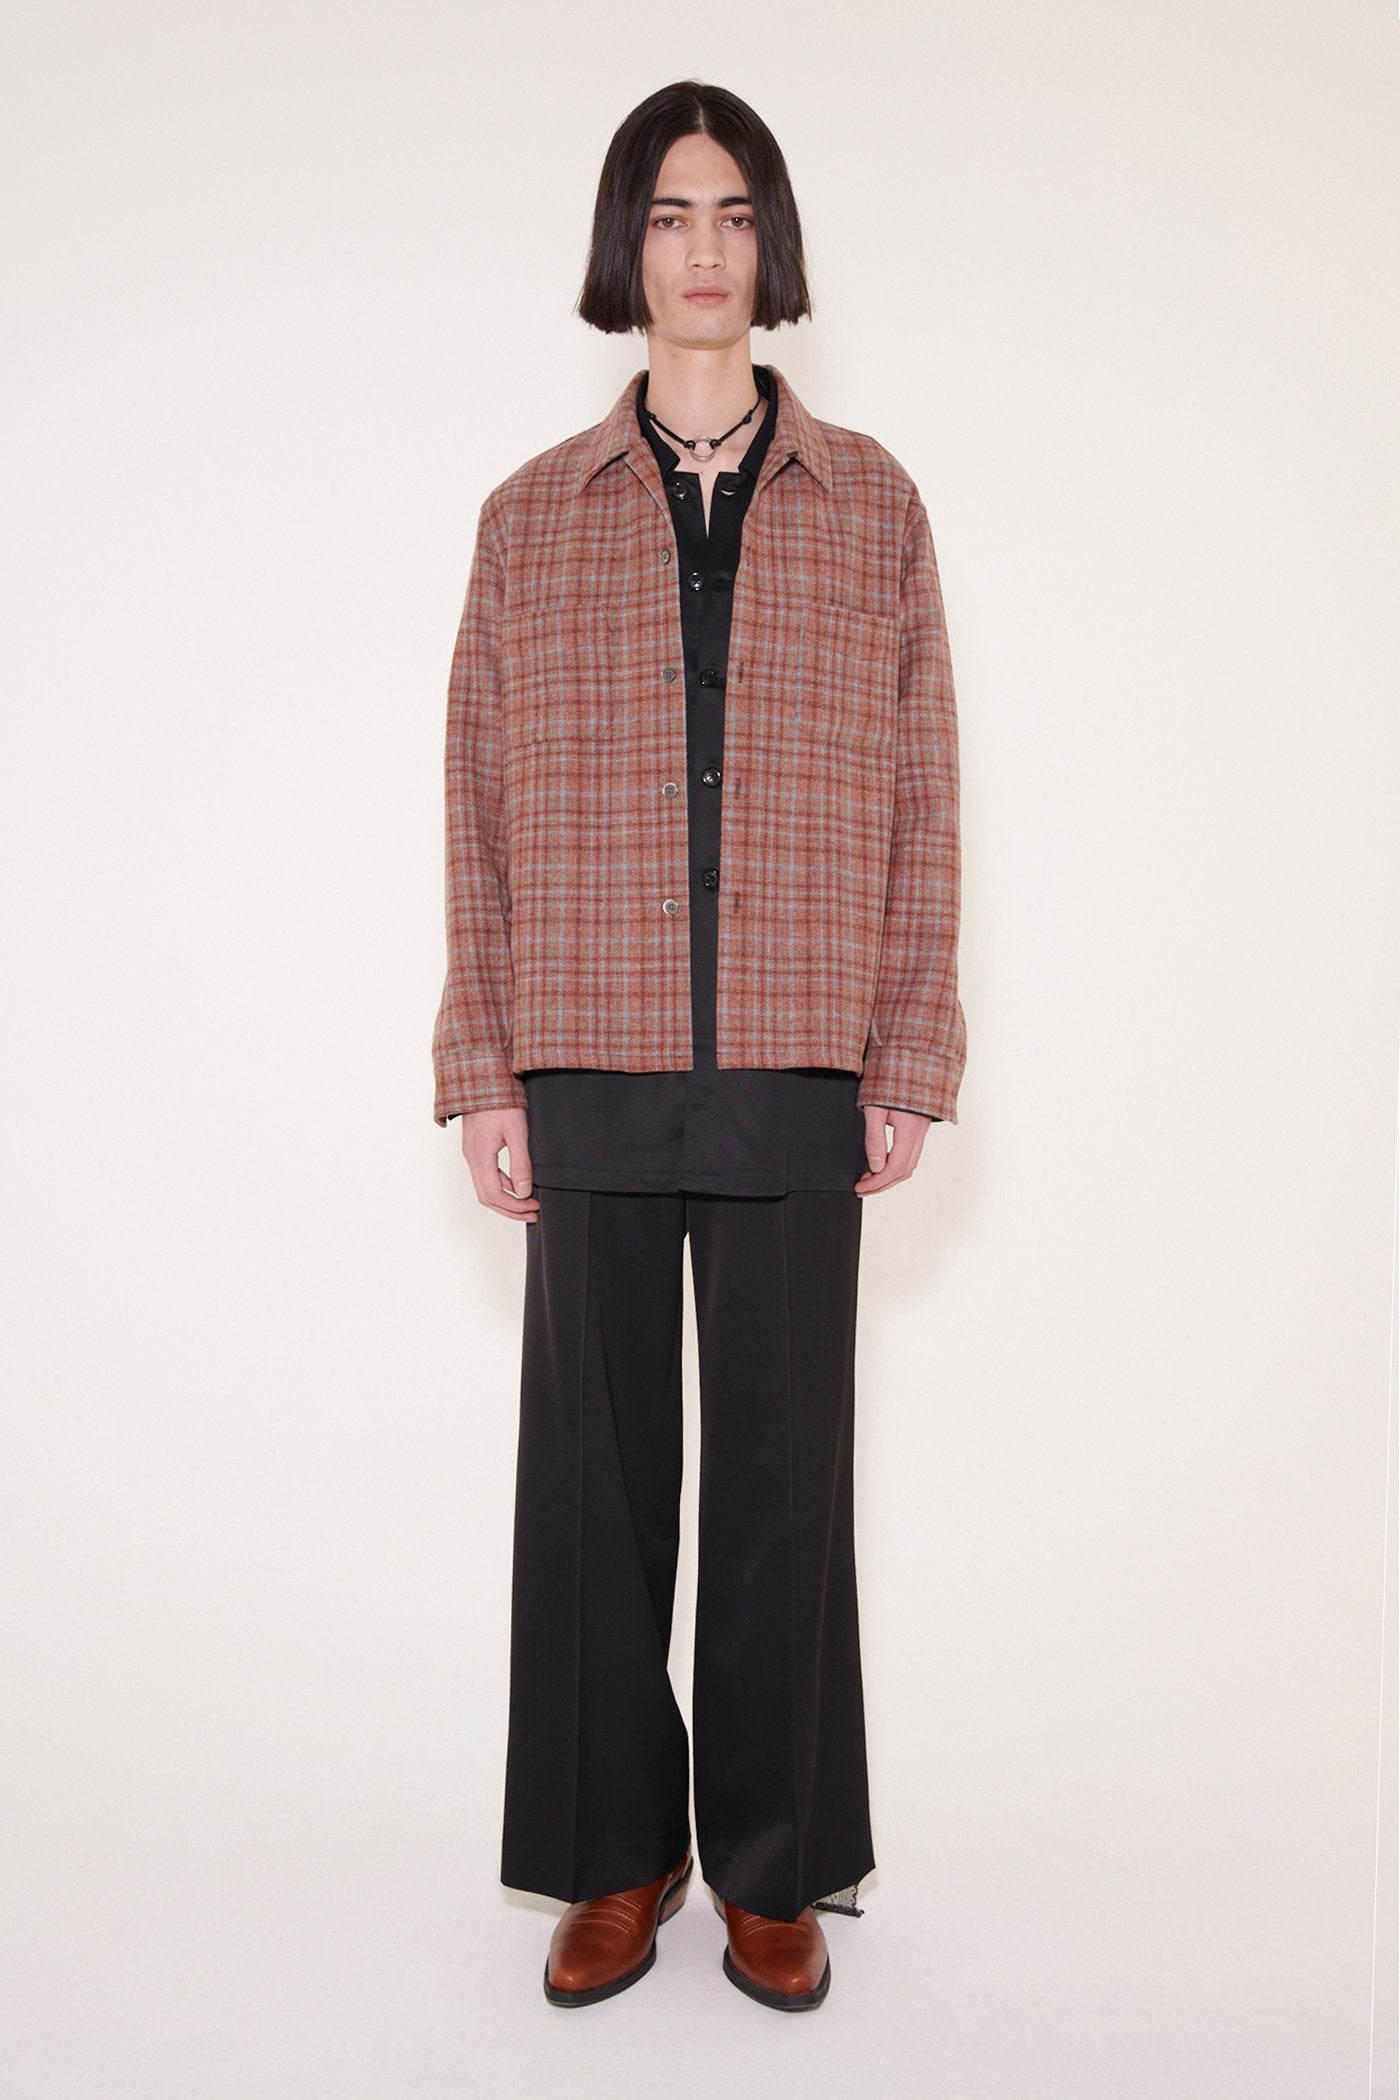 OUR LEGACY 「HEUSEN SHIRT RUST CHECK COUNTRY WOOL」 – SISTER